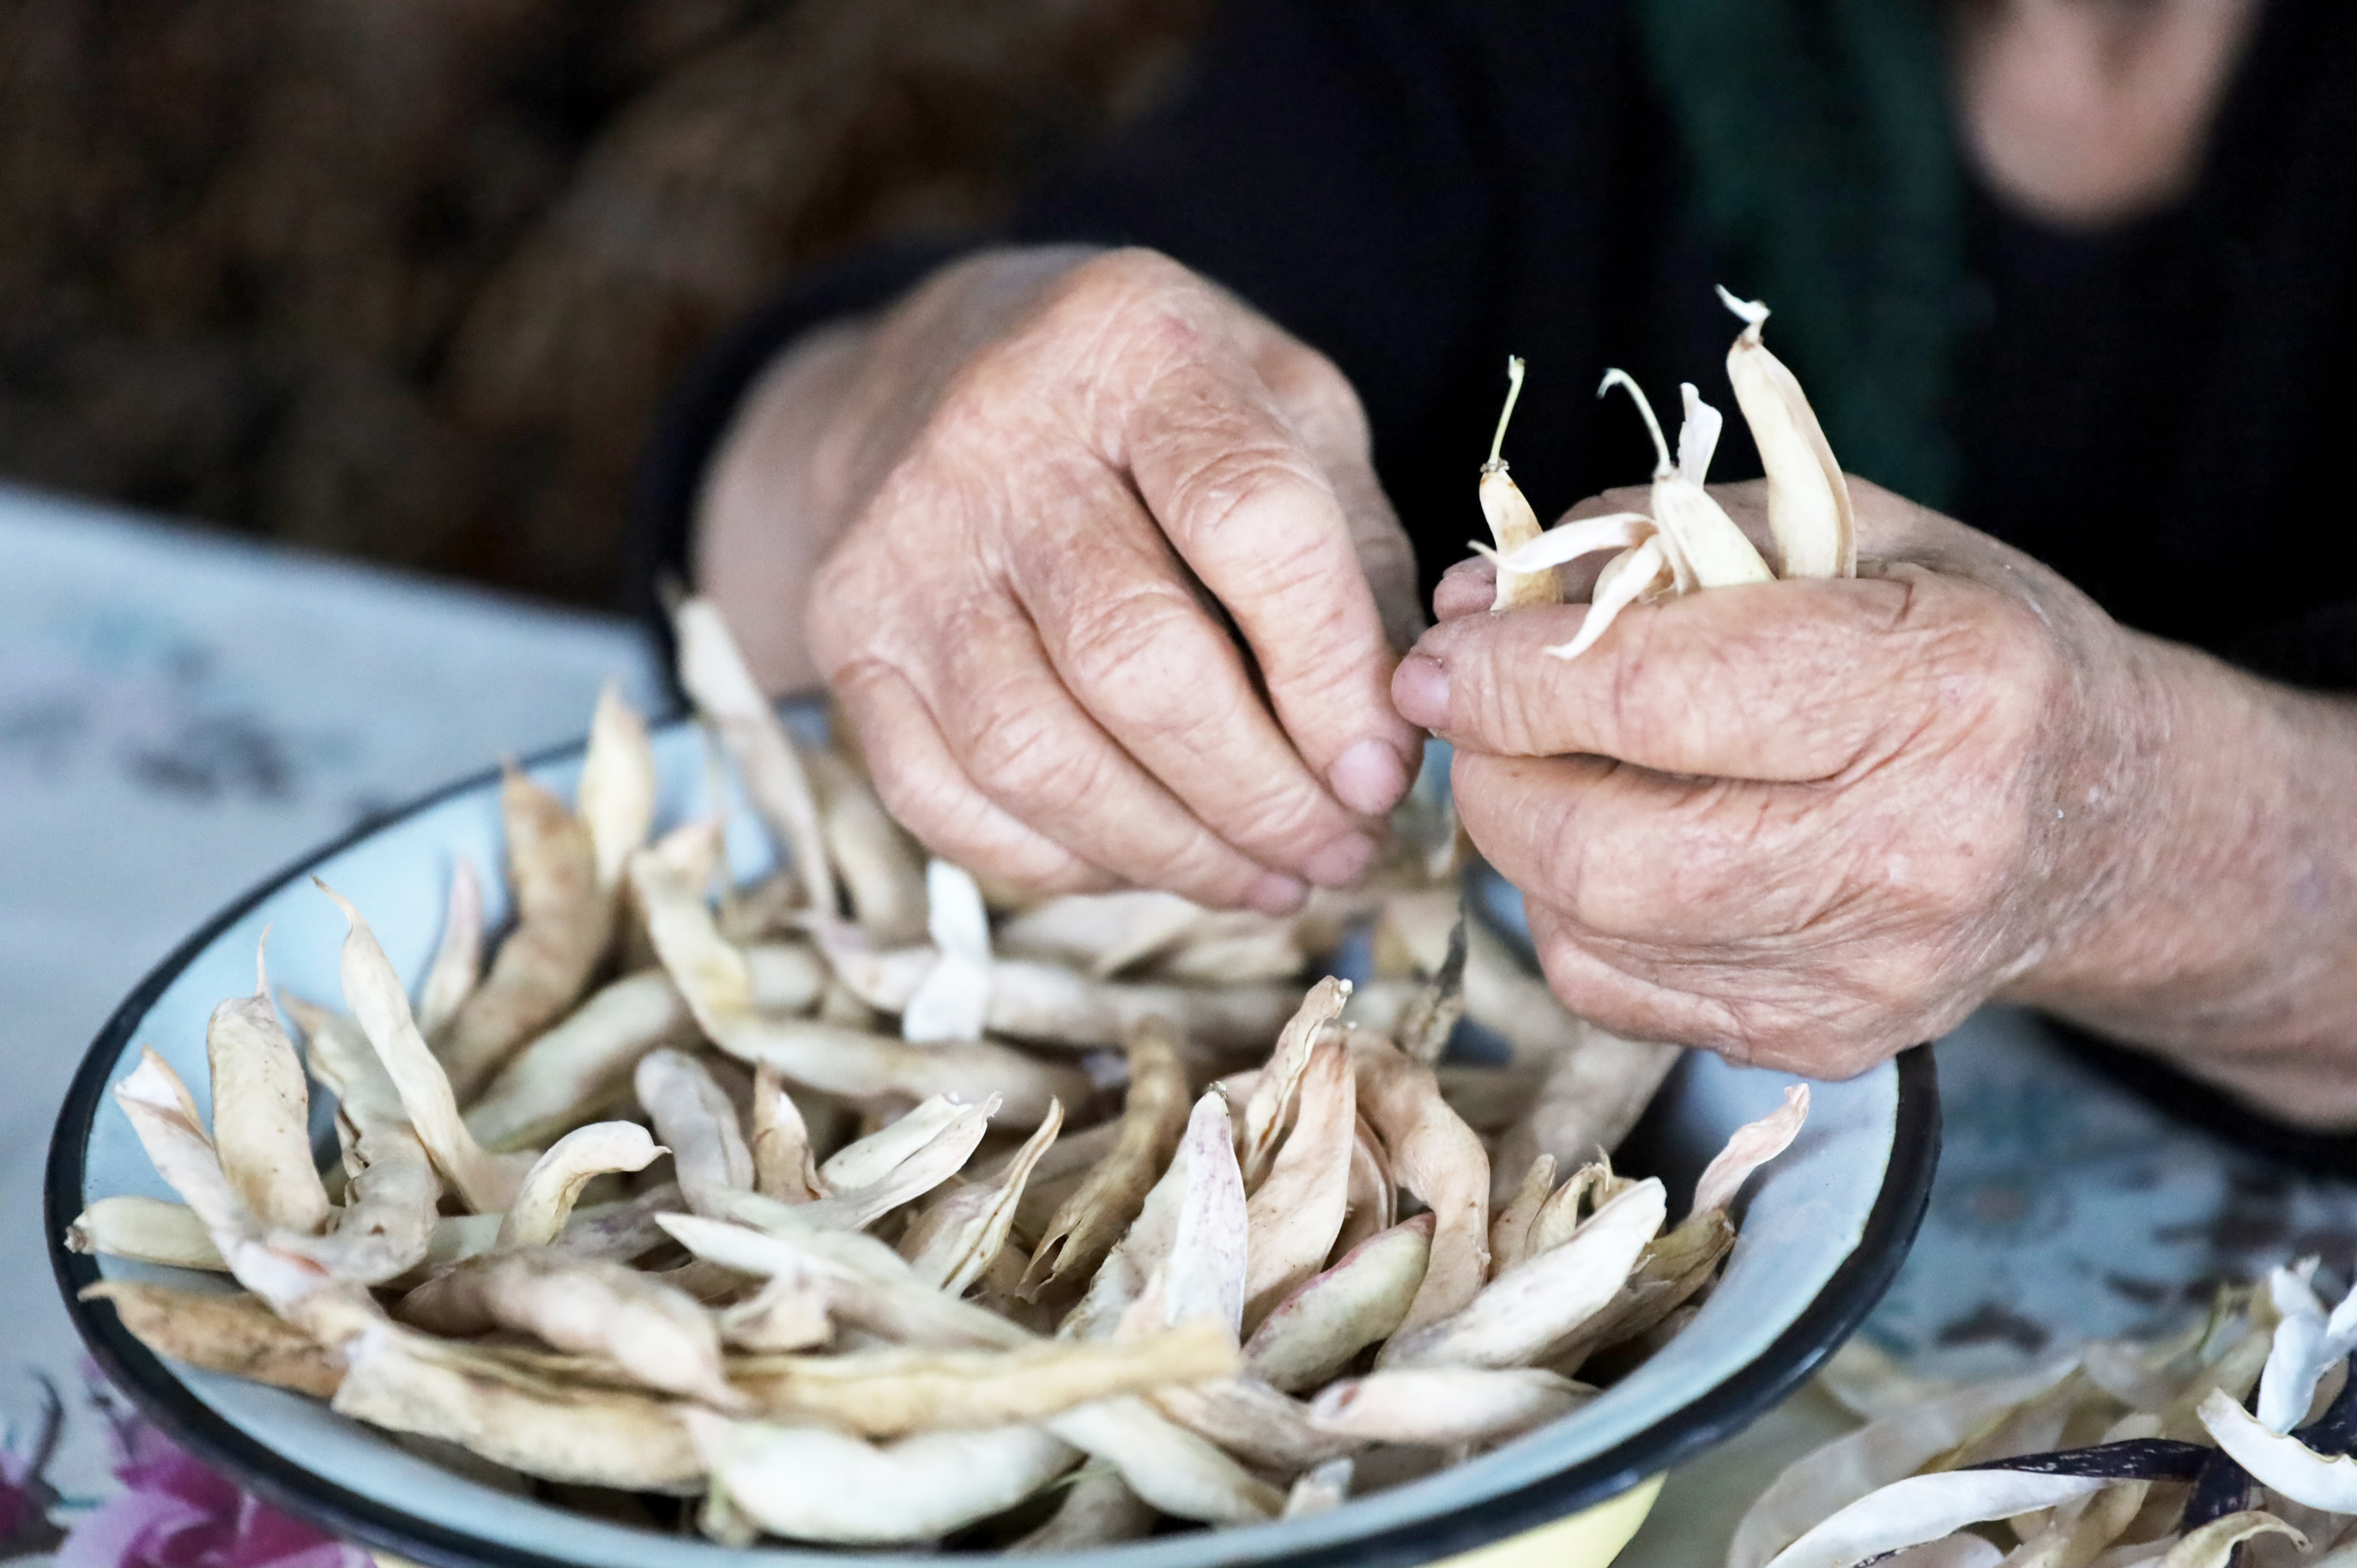 grandma Goharik was separating the seeds from the crushed husks of the beans grown in her garden 